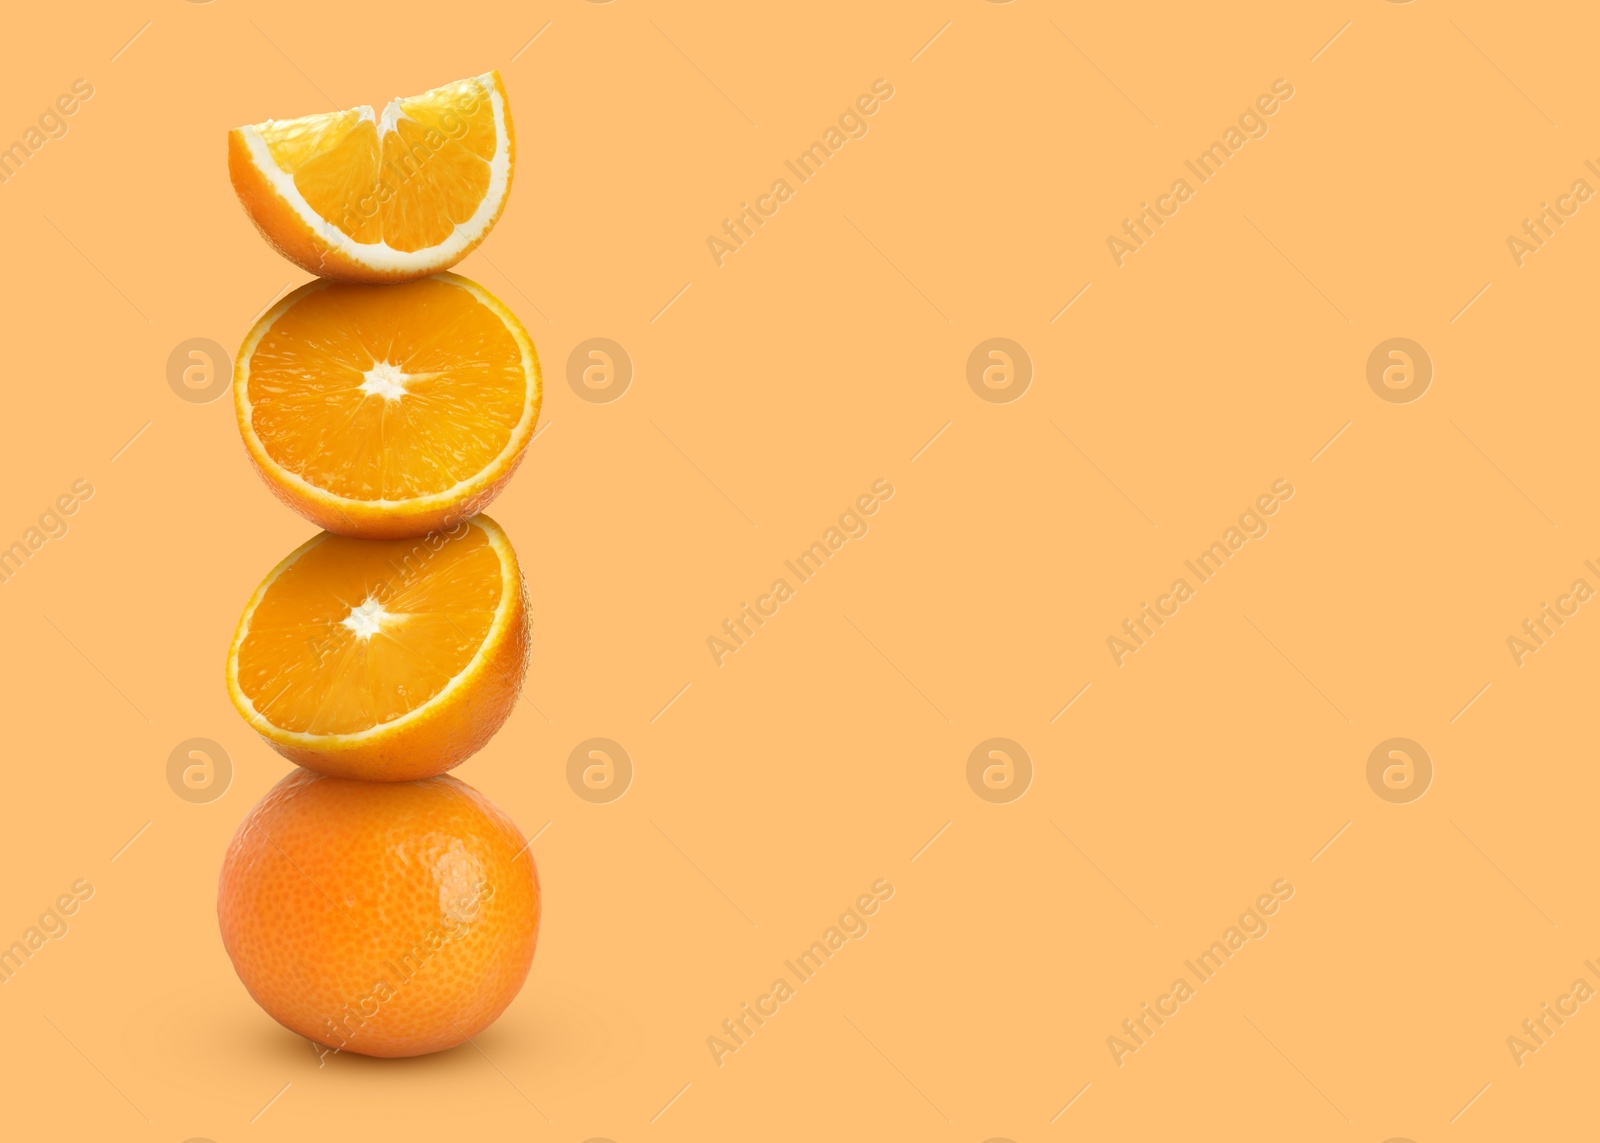 Image of Stacked cut and whole oranges on light orange background, space for text